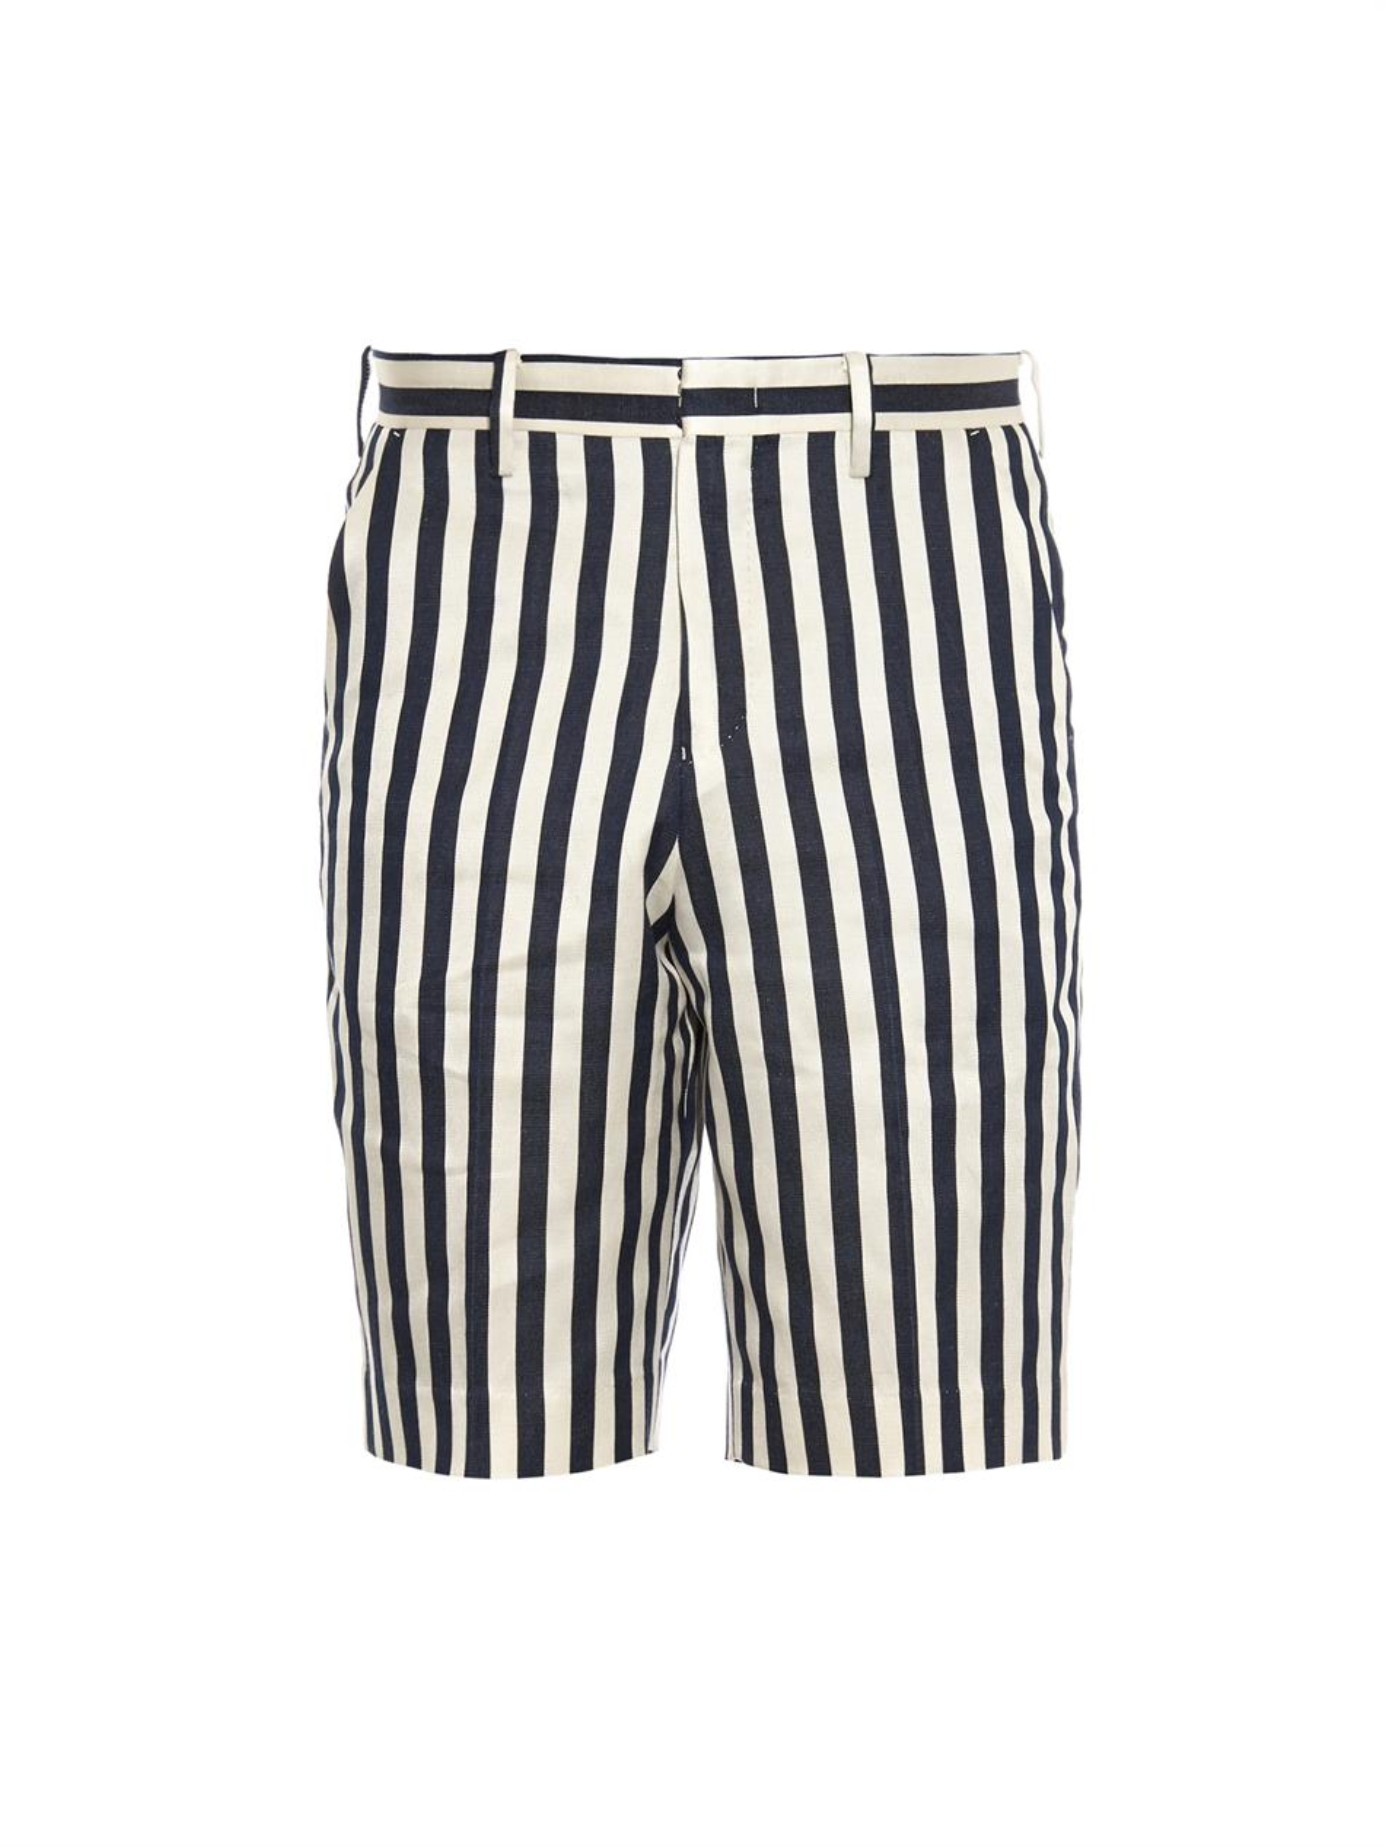 white shorts with blue stripes